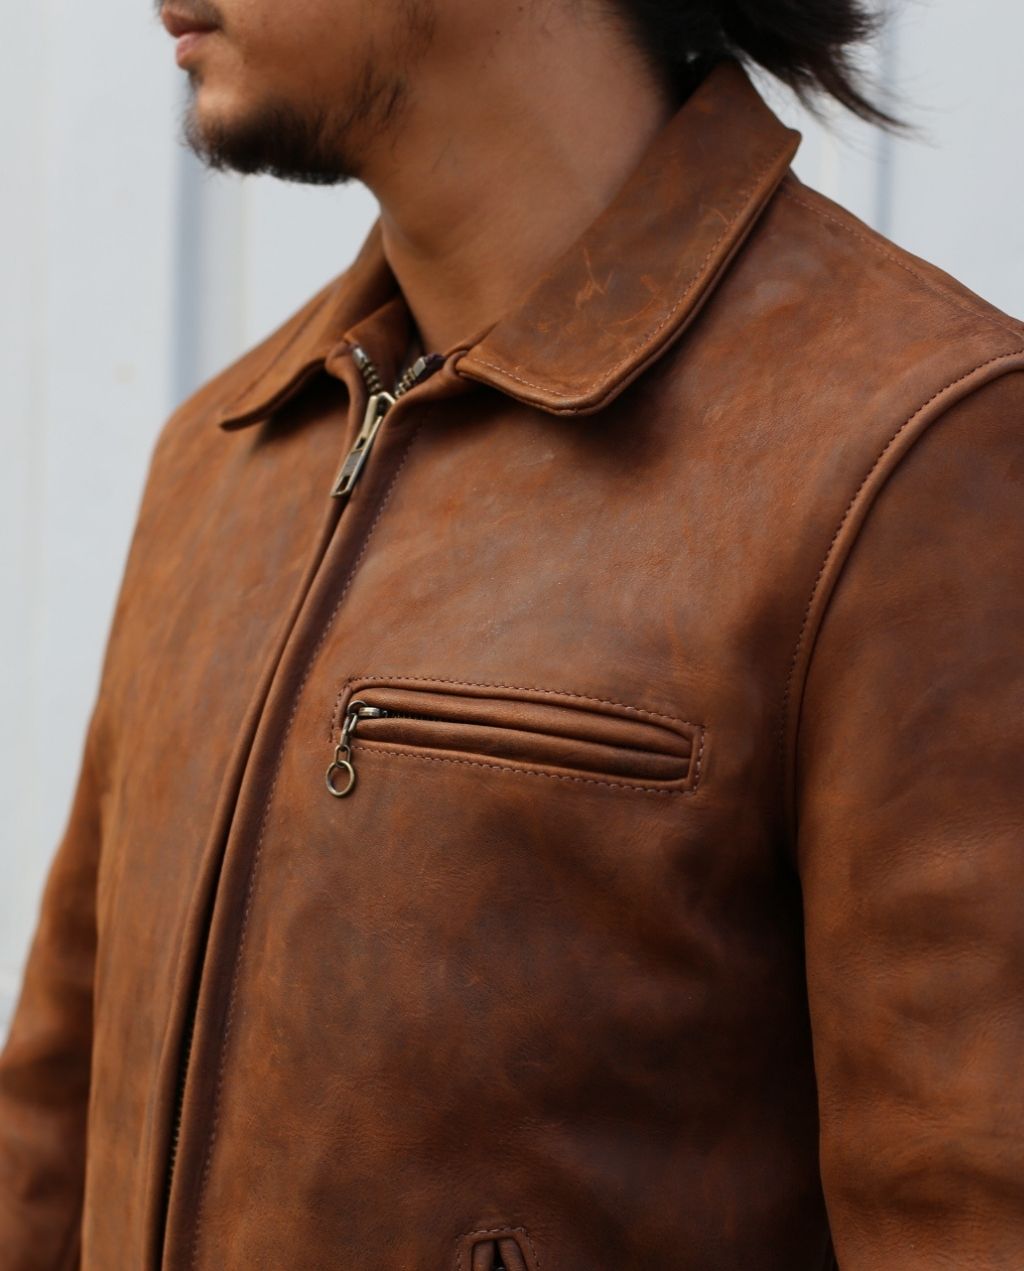 STORM P673 - HEAVYWEIGHT OILED NUBUCK LEATHER DELIVERY JACKET P673